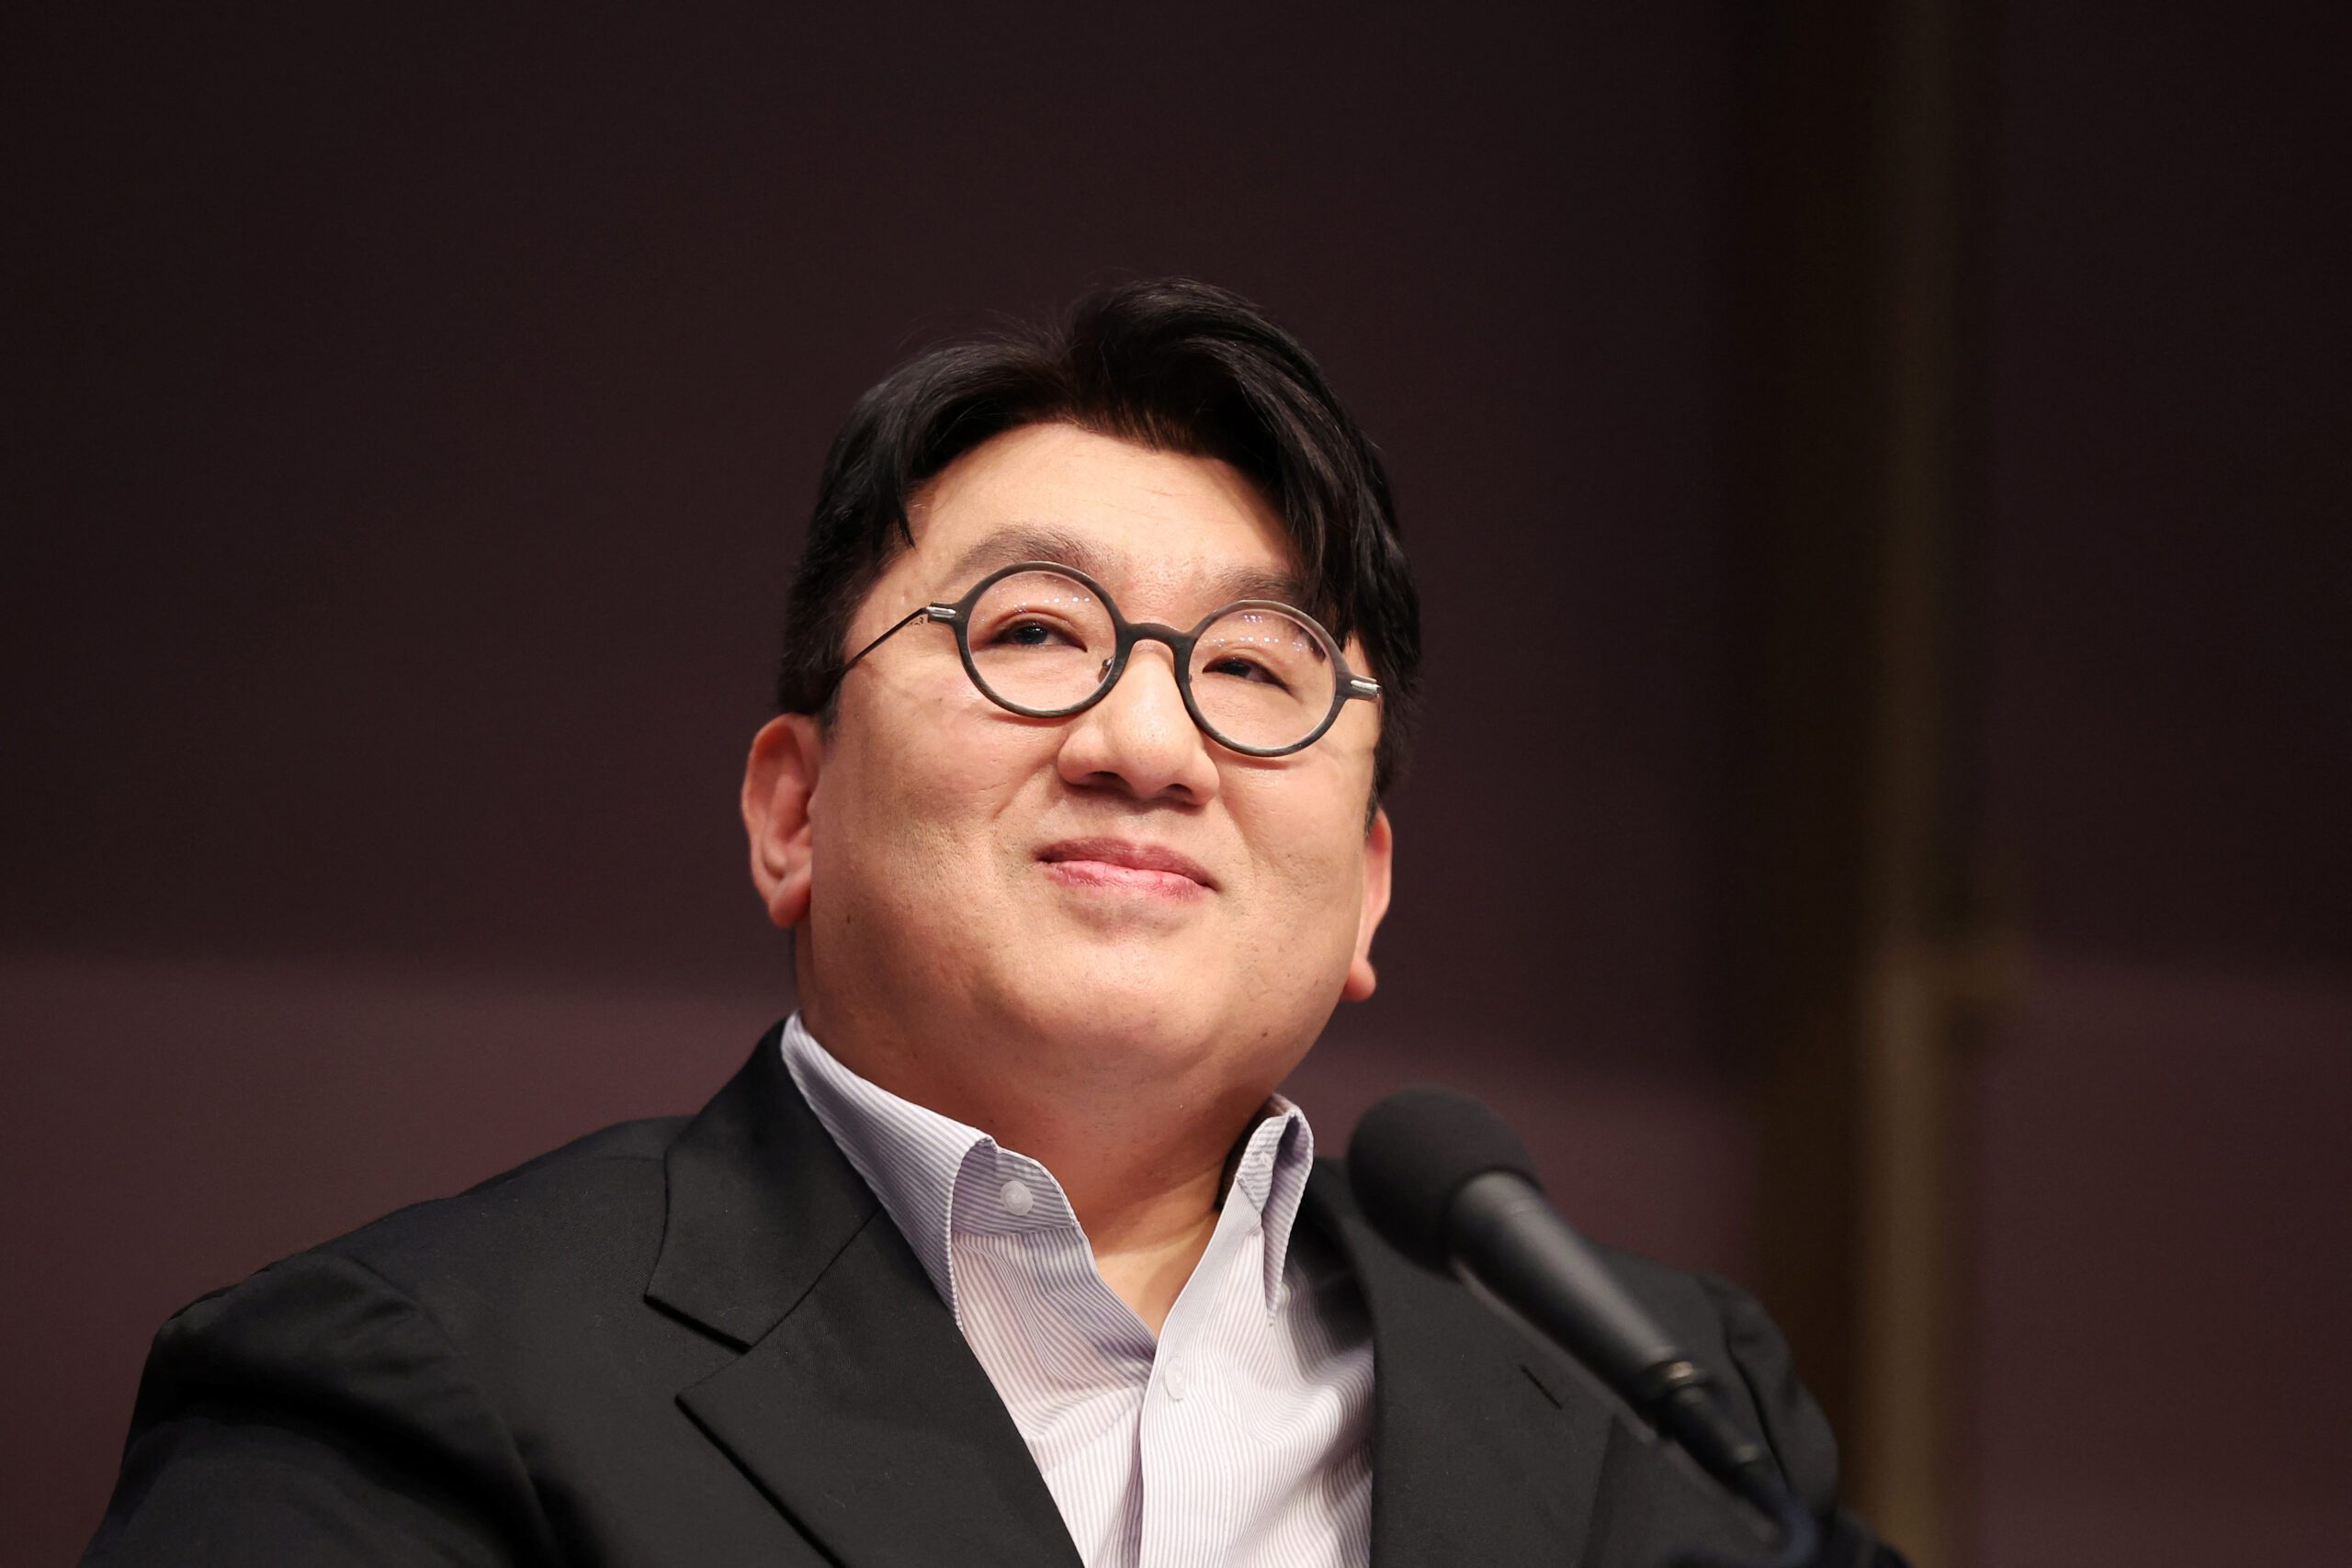 K-pop takeover battle loser HYBE to sell $437 million stake in SM Entertainment